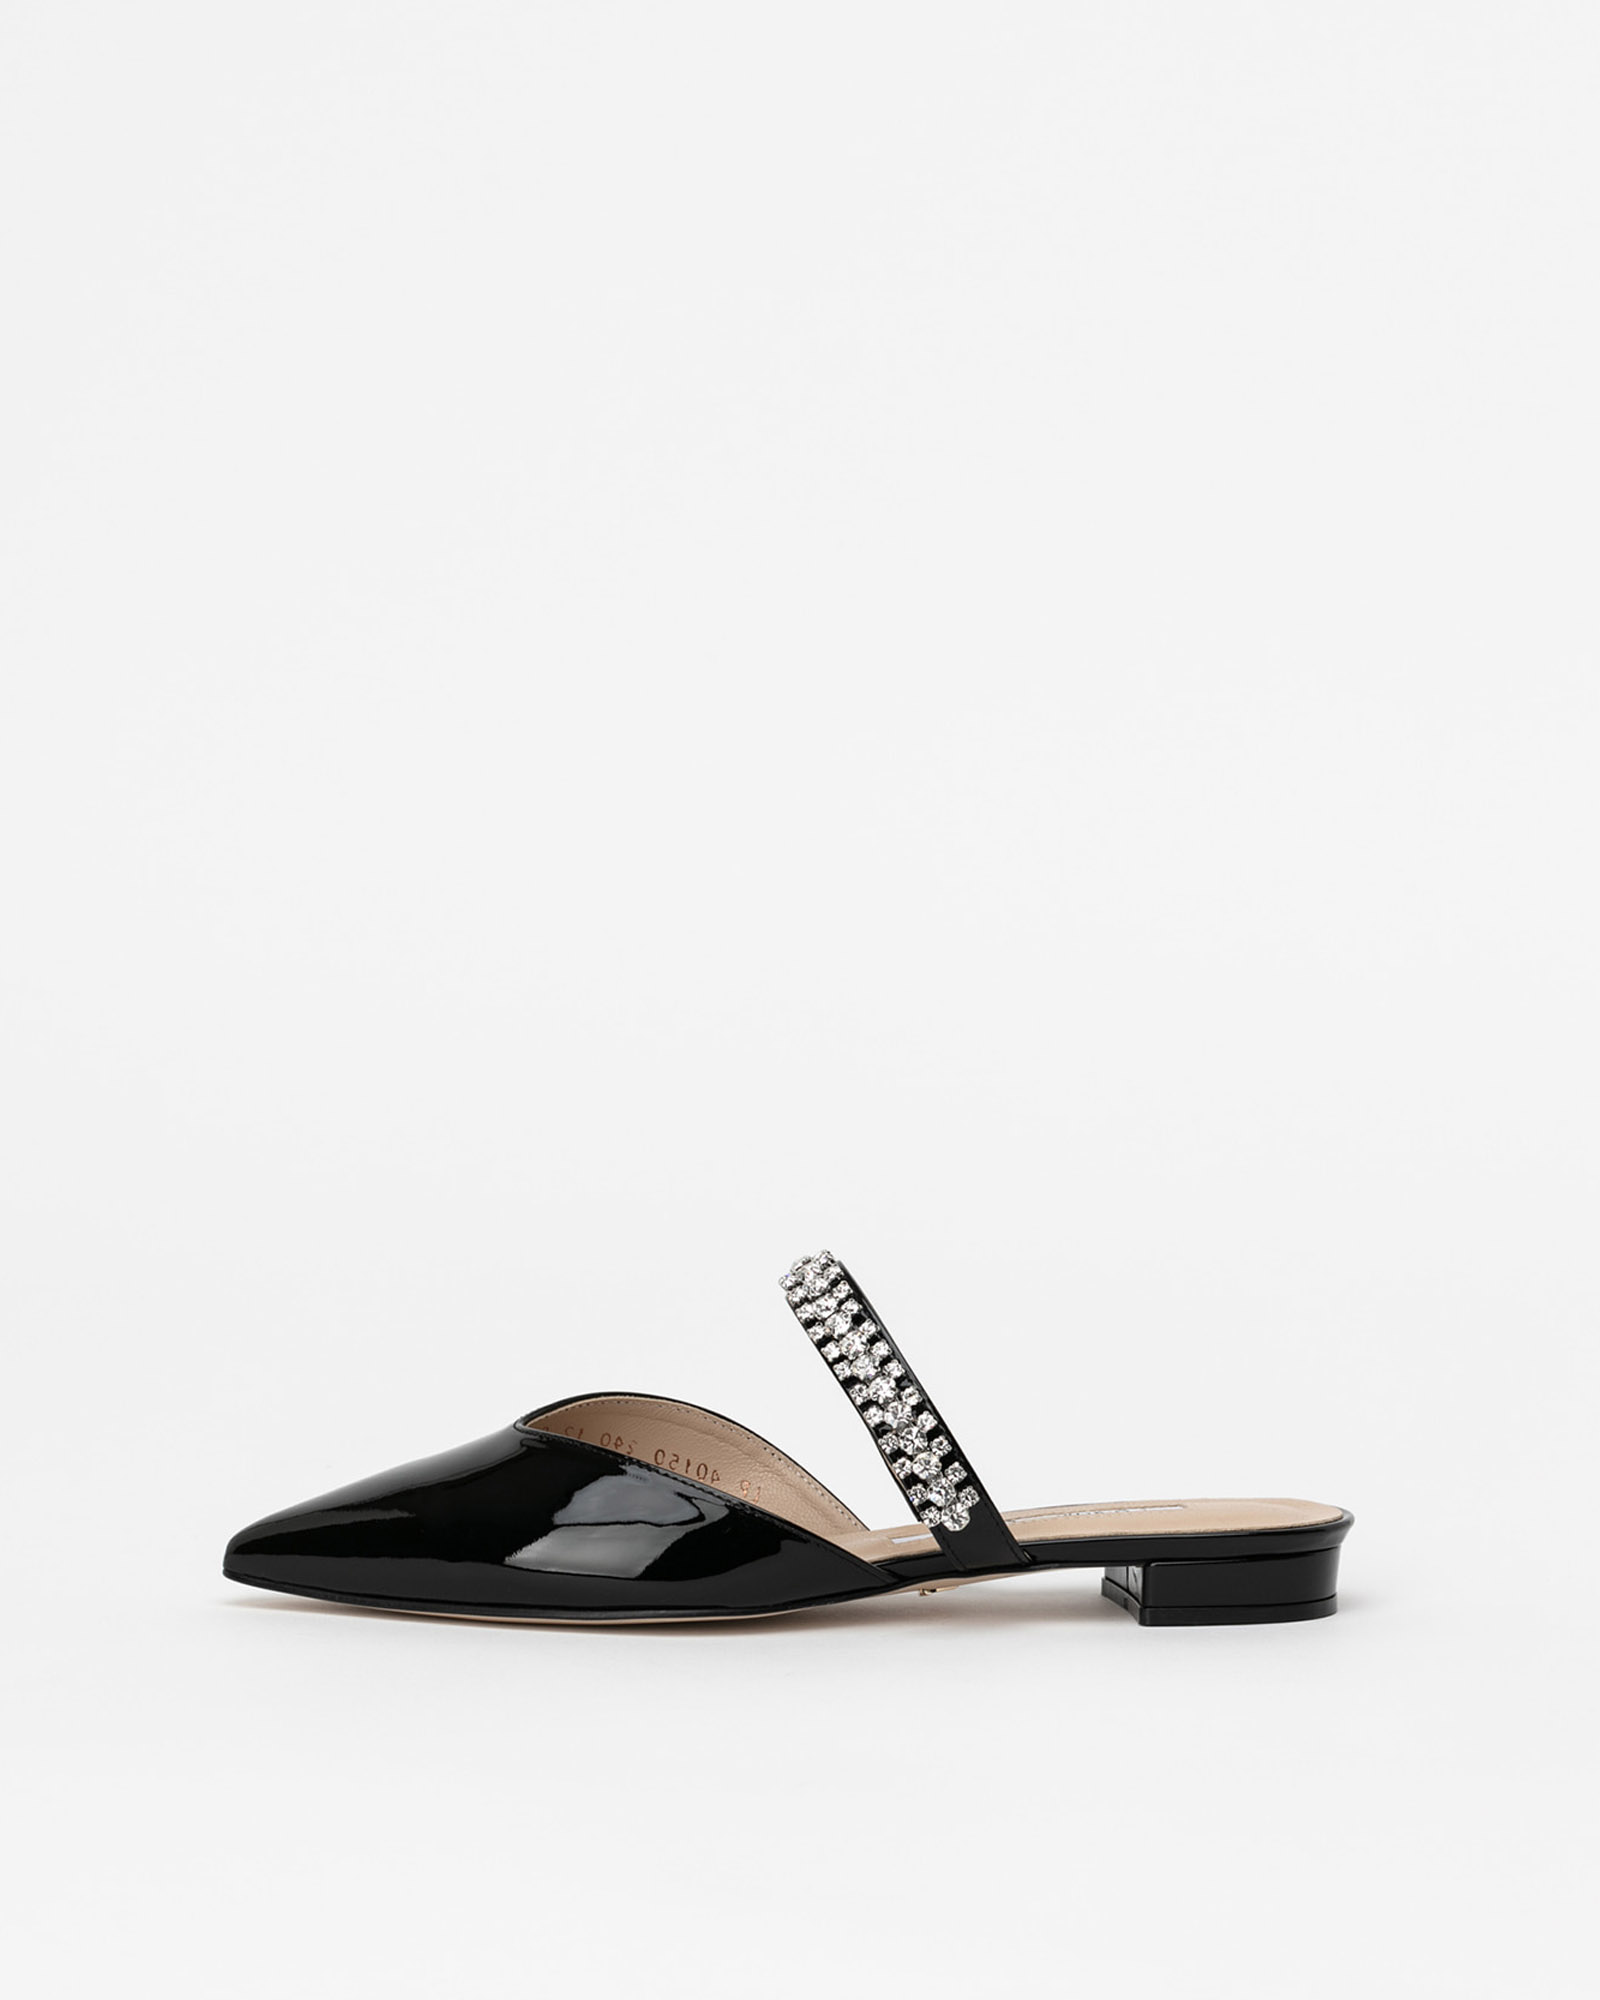 Patio Jeweled Slides in Black Patent